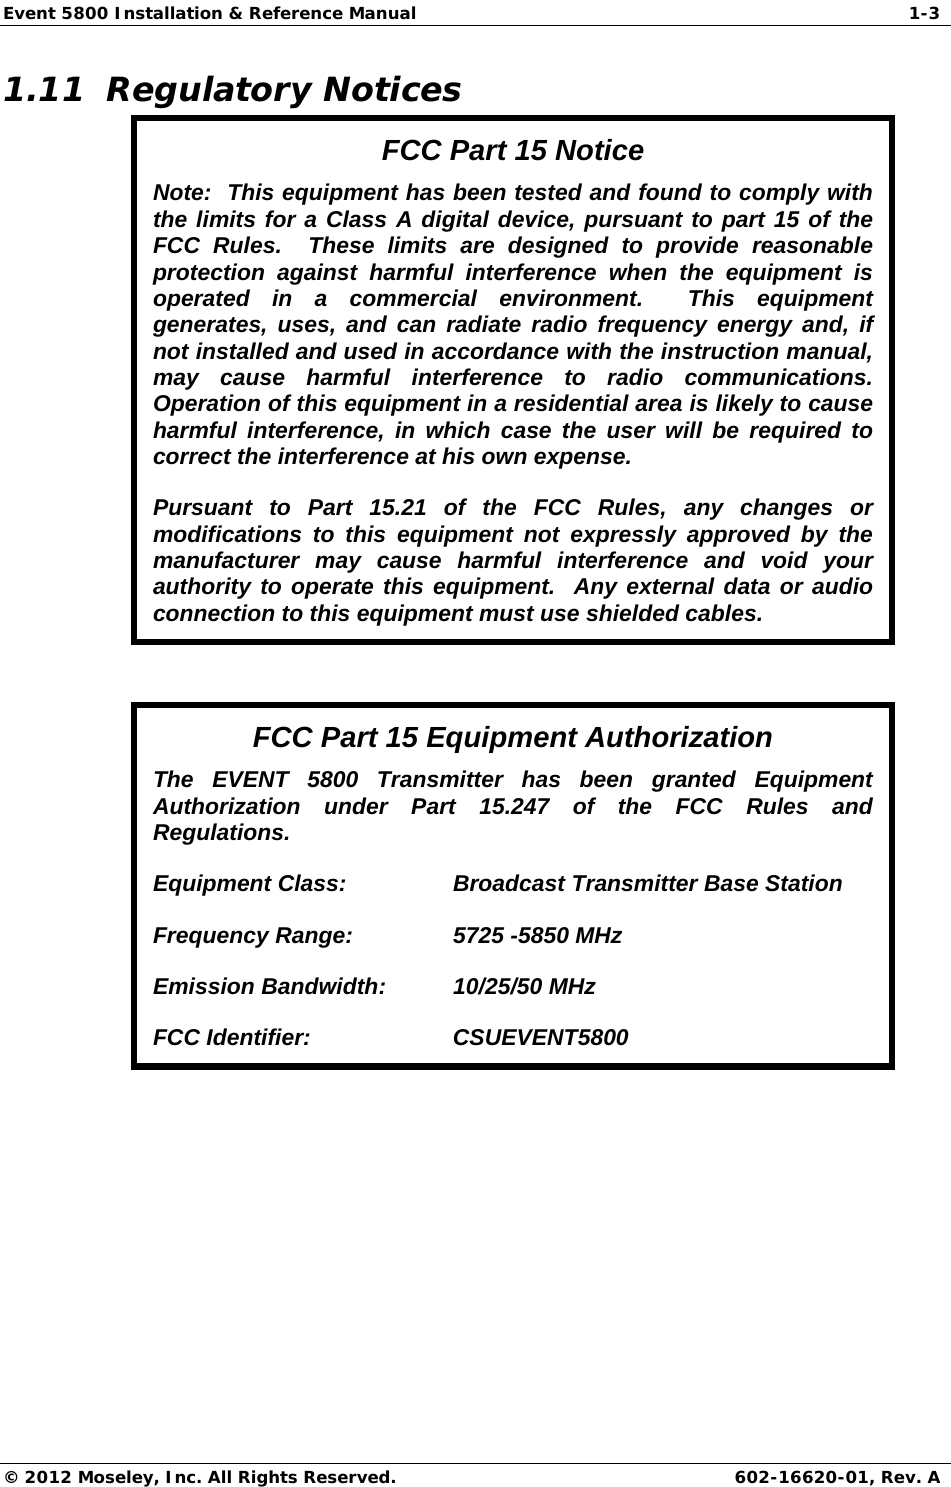 Event 5800 Installation &amp; Reference Manual  1-3 © 2012 Moseley, Inc. All Rights Reserved. 602-16620-01, Rev. A 1.11  Regulatory Notices FCC Part 15 Notice Note:  This equipment has been tested and found to comply with the limits for a Class A digital device, pursuant to part 15 of the FCC Rules.  These limits are designed to provide reasonable protection against harmful interference when the equipment is operated in a commercial environment.  This equipment generates, uses, and can radiate radio frequency energy and, if not installed and used in accordance with the instruction manual, may cause harmful interference to radio communications.  Operation of this equipment in a residential area is likely to cause harmful interference, in which case the user will be required to correct the interference at his own expense. Pursuant to Part 15.21 of the FCC Rules, any changes or modifications to this equipment not expressly approved by the manufacturer may cause harmful interference and void your authority to operate this equipment.  Any external data or audio connection to this equipment must use shielded cables.  FCC Part 15 Equipment Authorization The EVENT 5800 Transmitter has been granted Equipment Authorization under Part 15.247 of the FCC Rules and Regulations. Equipment Class:    Broadcast Transmitter Base Station Frequency Range:    5725 -5850 MHz Emission Bandwidth:  10/25/50 MHz FCC Identifier:    CSUEVENT5800  